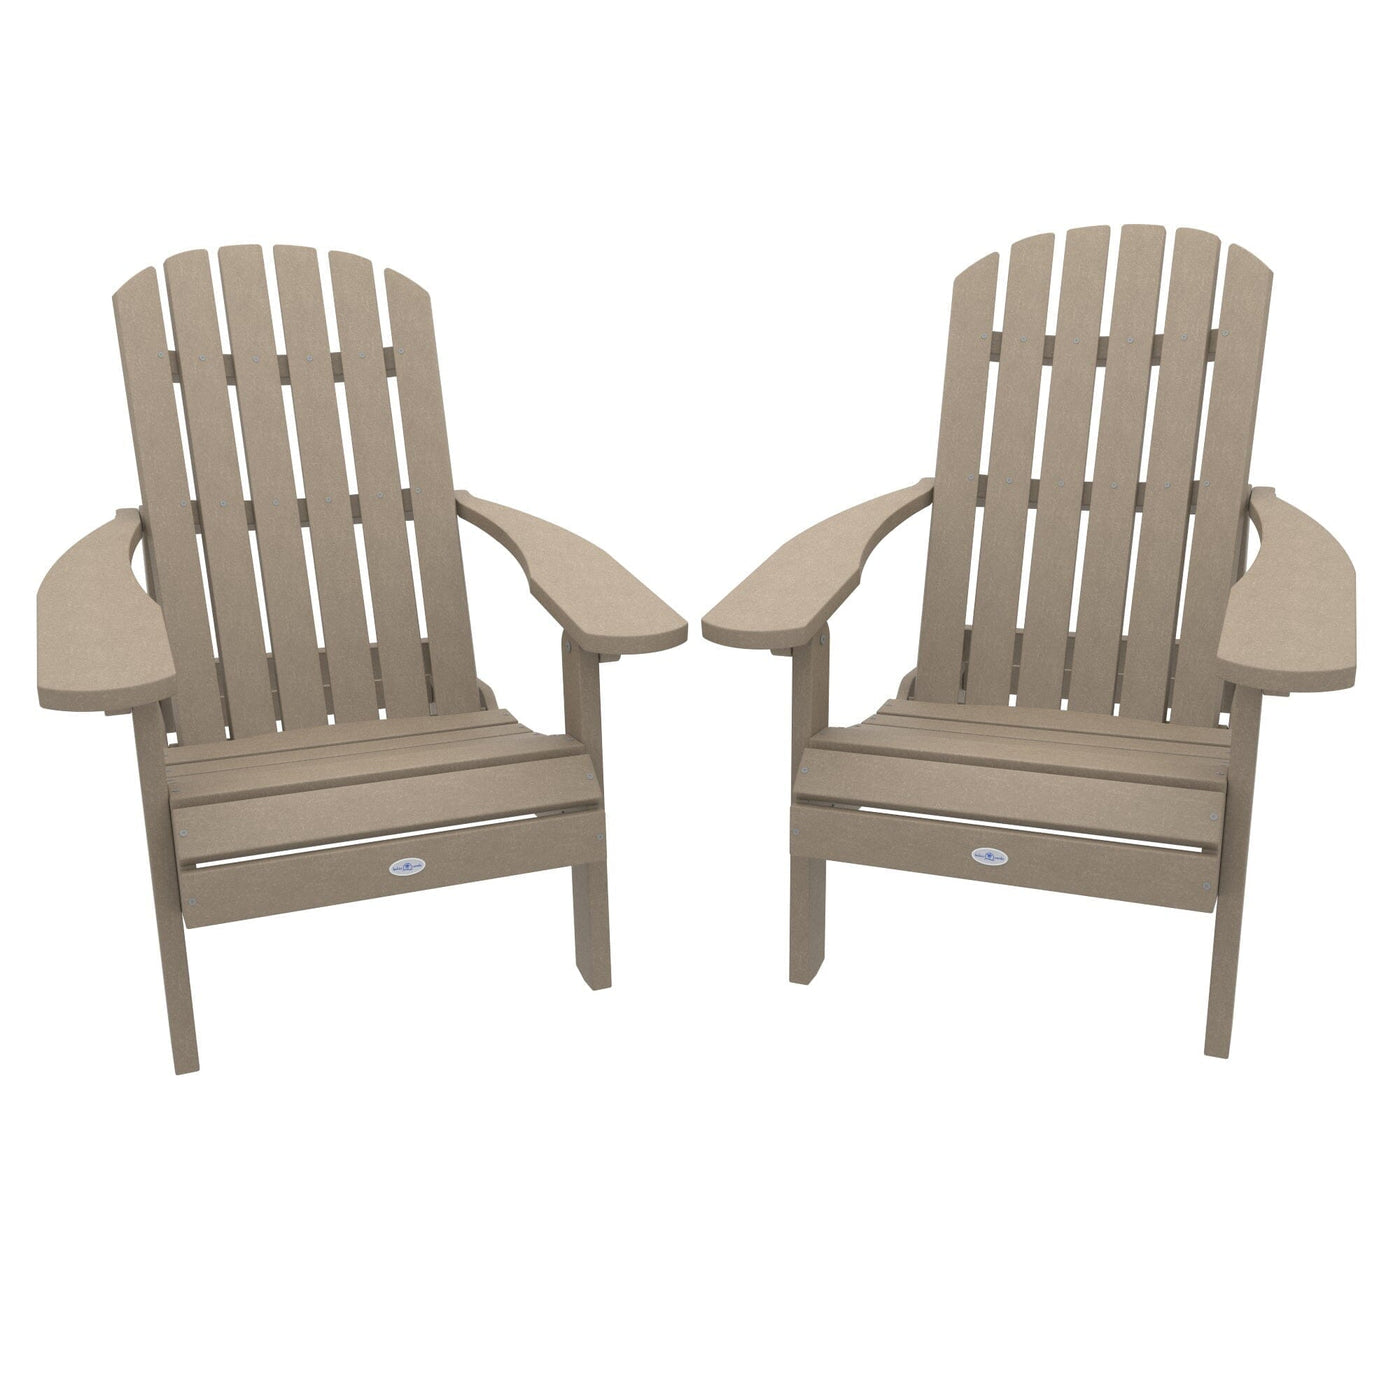 Cape Folding and Reclining Adirondack Chair (Set of 2) Kitted Set Bahia Verde Outdoors Cabana Tan 